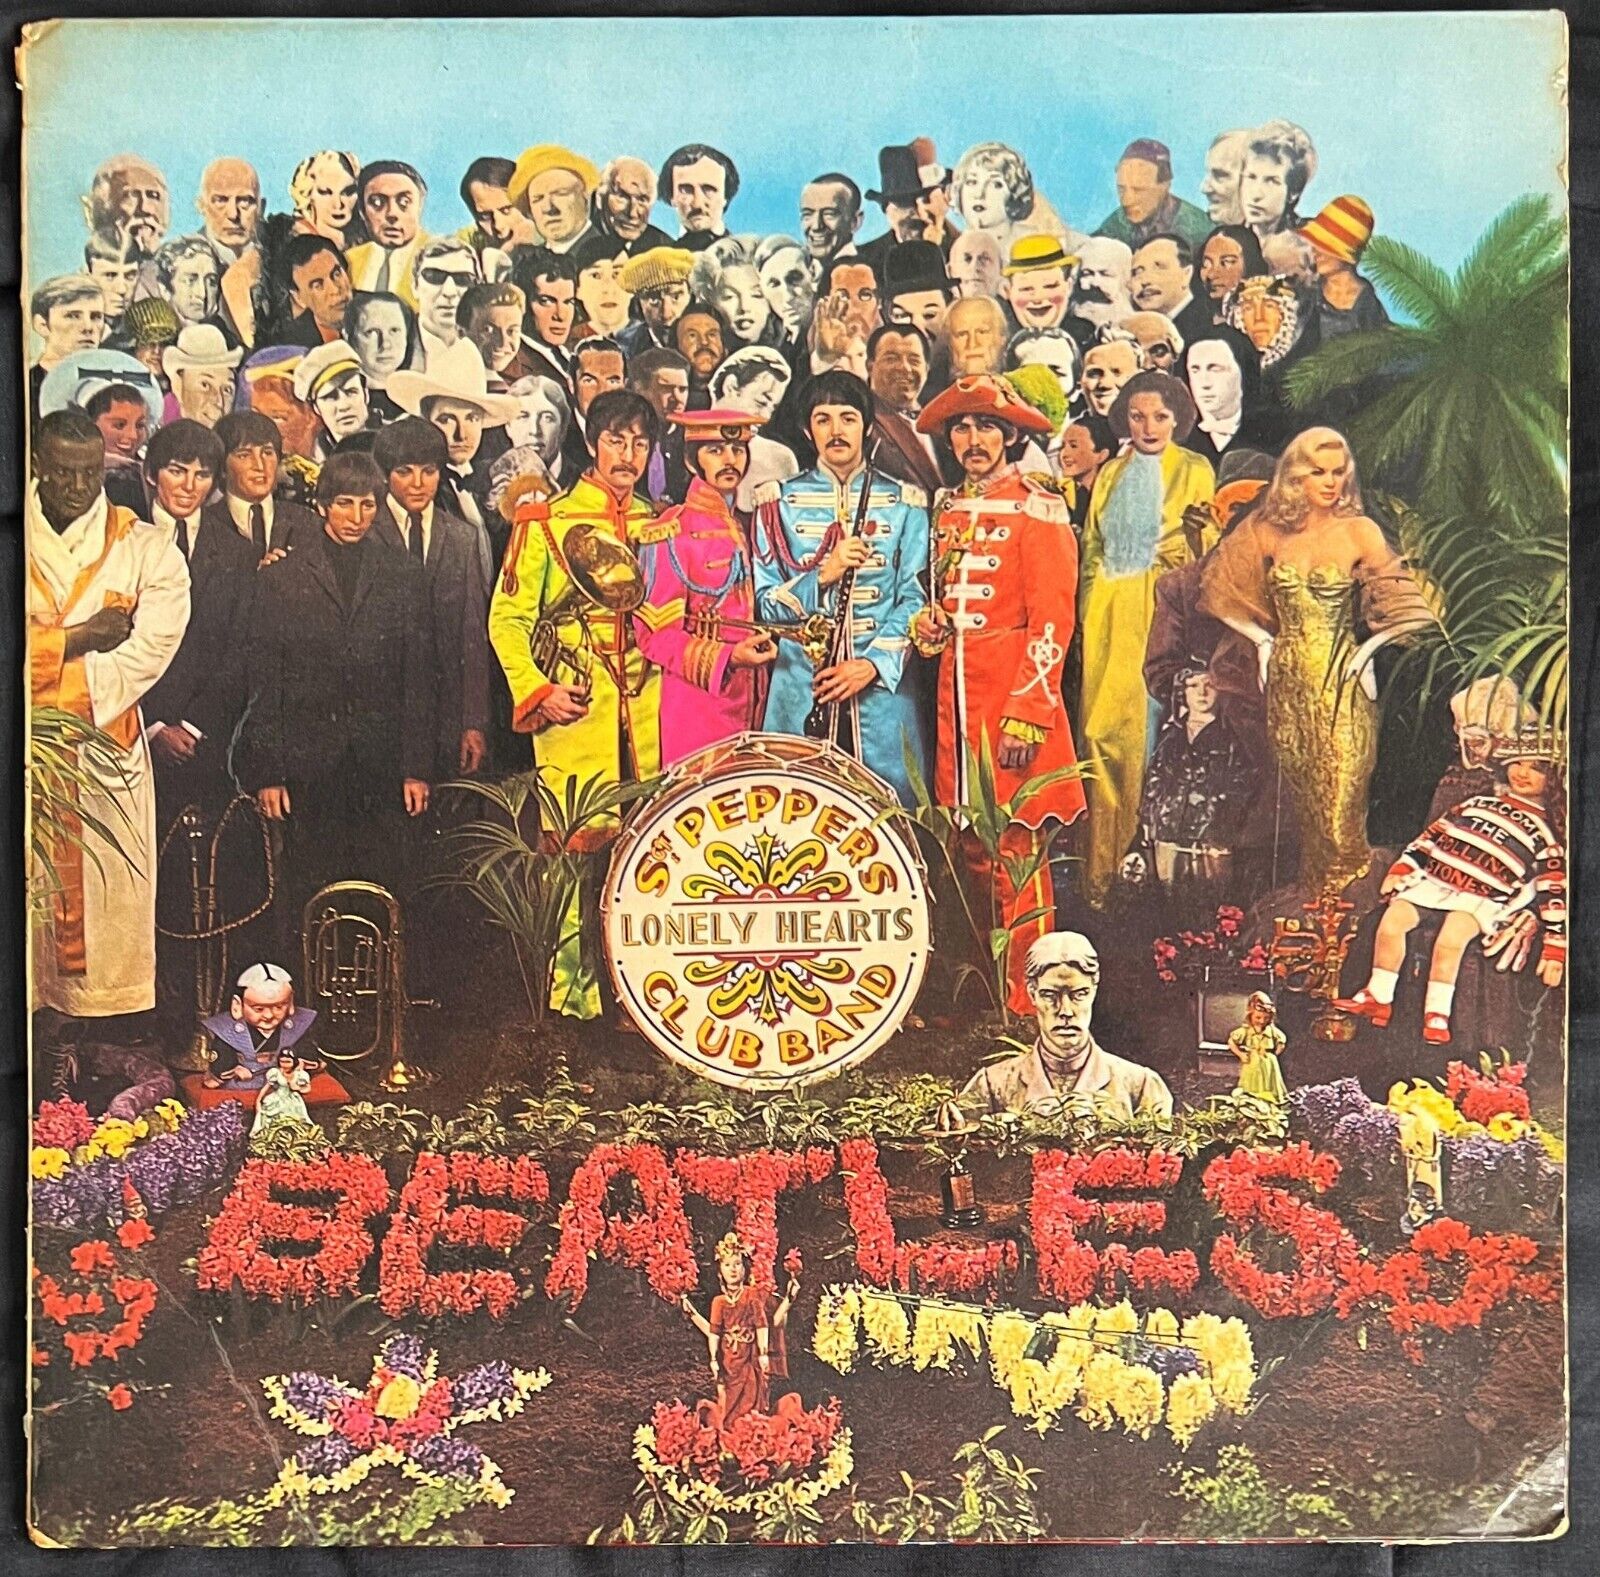 THE BEATLES Sgt Pepper's Lonely Hearts Club Band 1967 MONO Misprint UK 1967 VG+